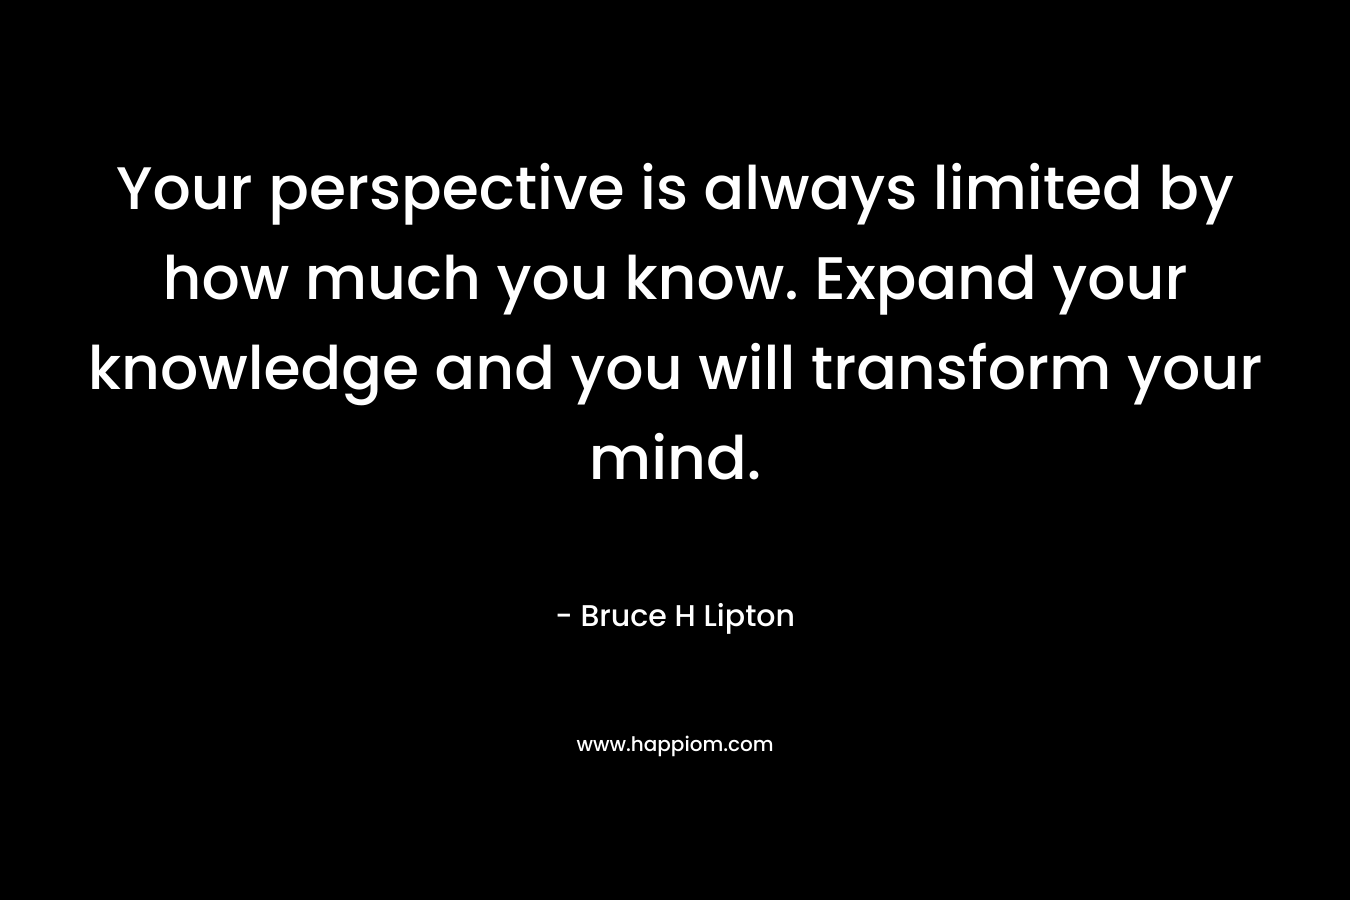 Your perspective is always limited by how much you know. Expand your knowledge and you will transform your mind.